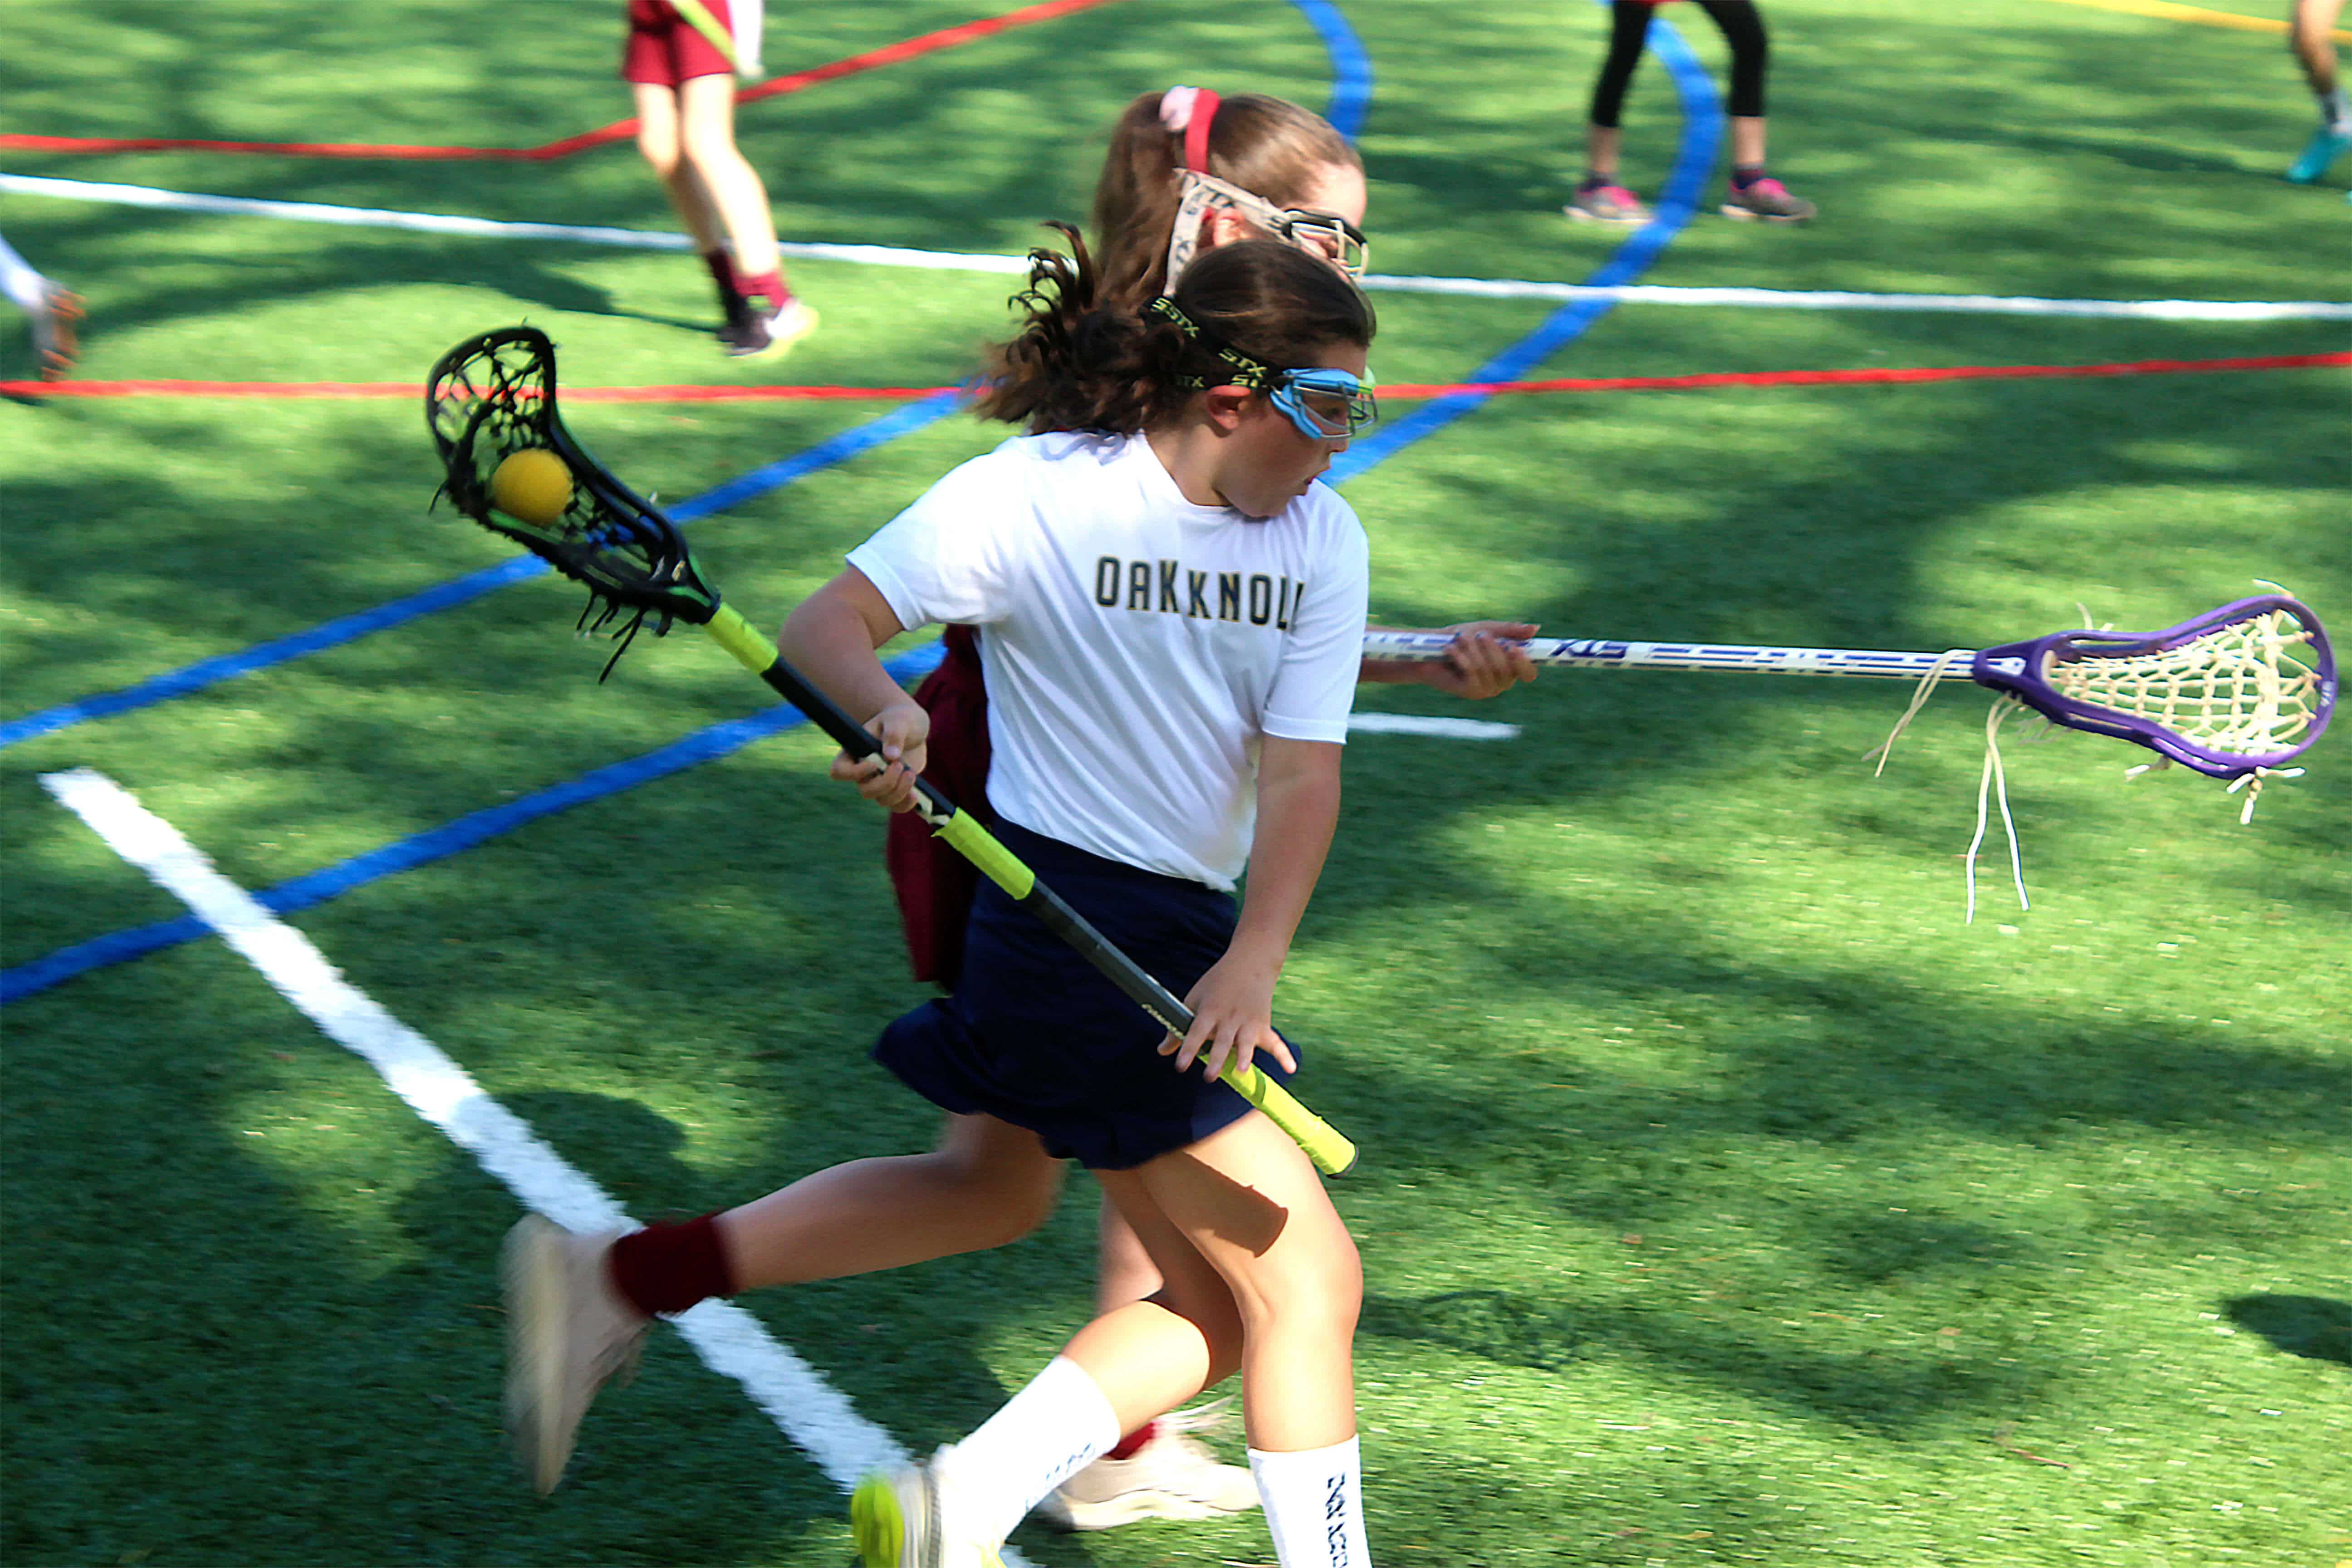 Female Lower School lacrosse player during a game at Oak Knoll